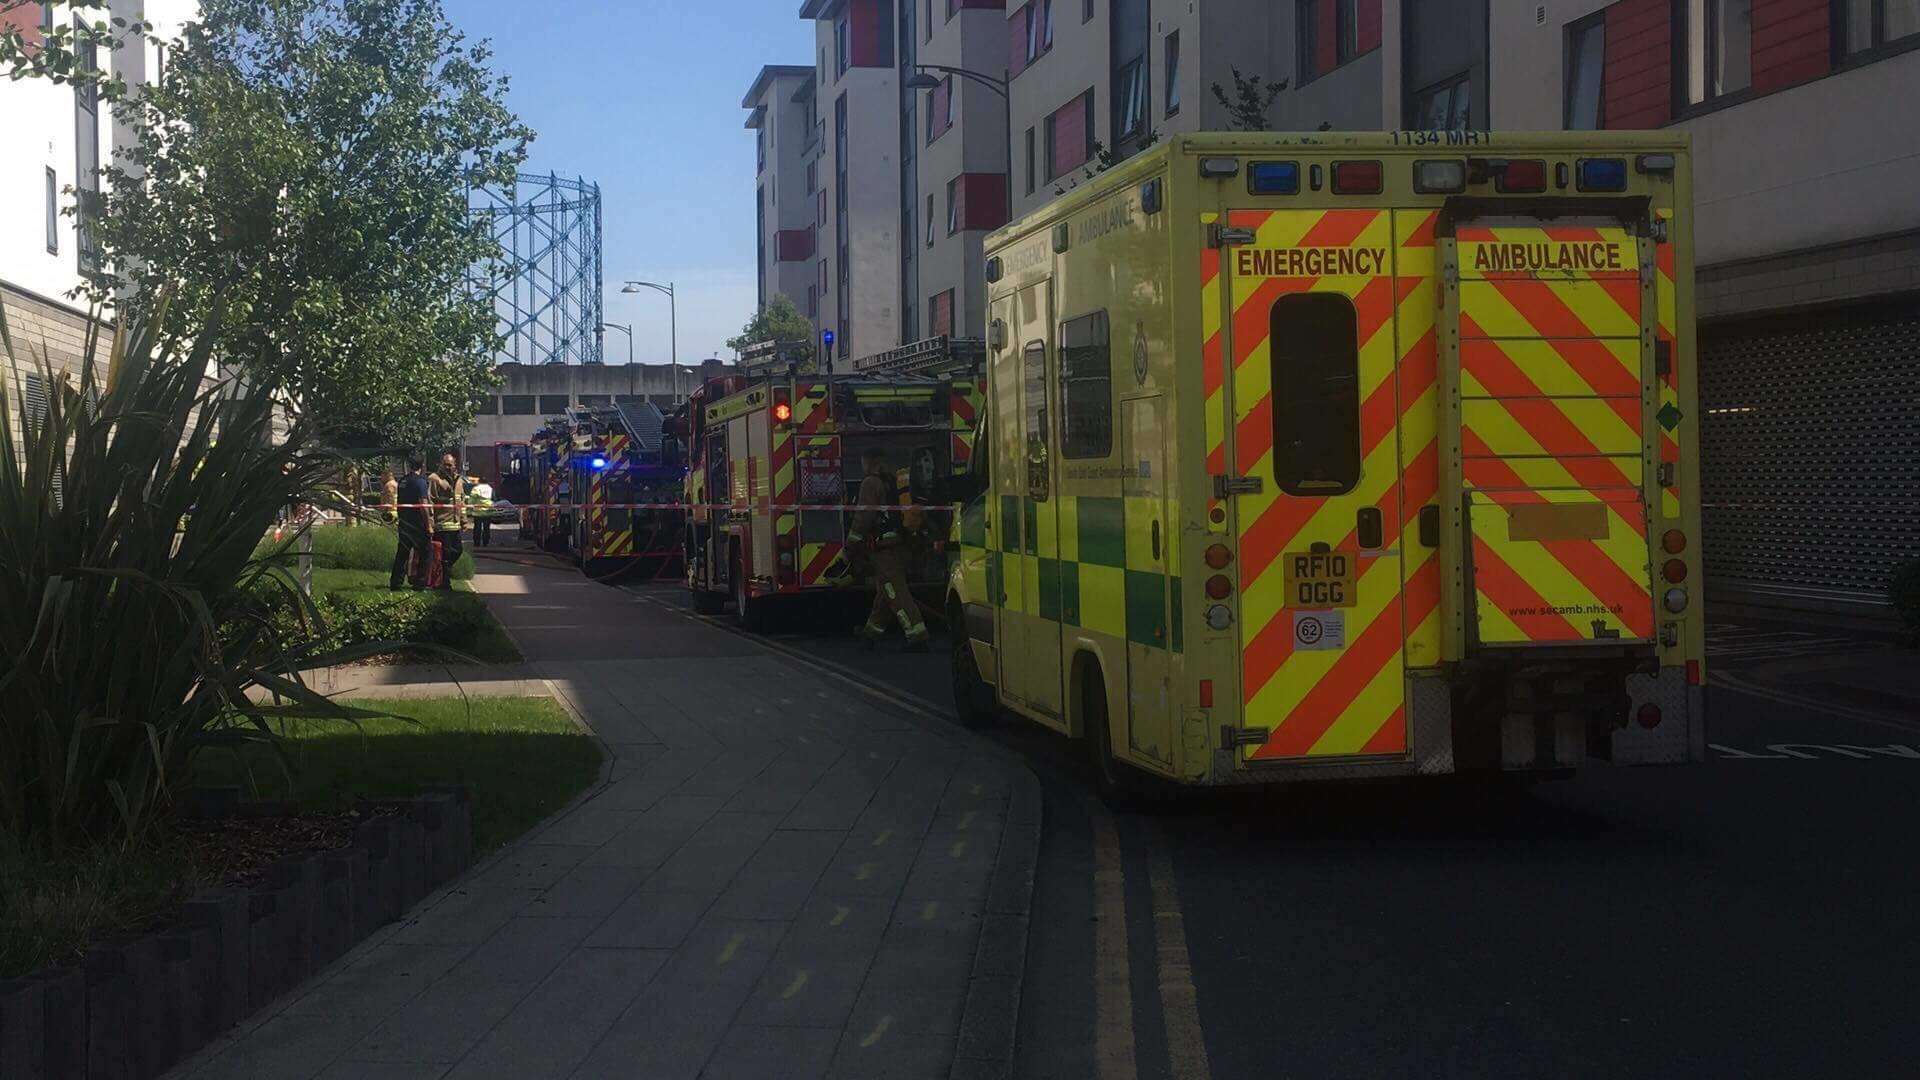 Emergency services at Liberty Quays (2057225) Credit: Shabir Noorzai